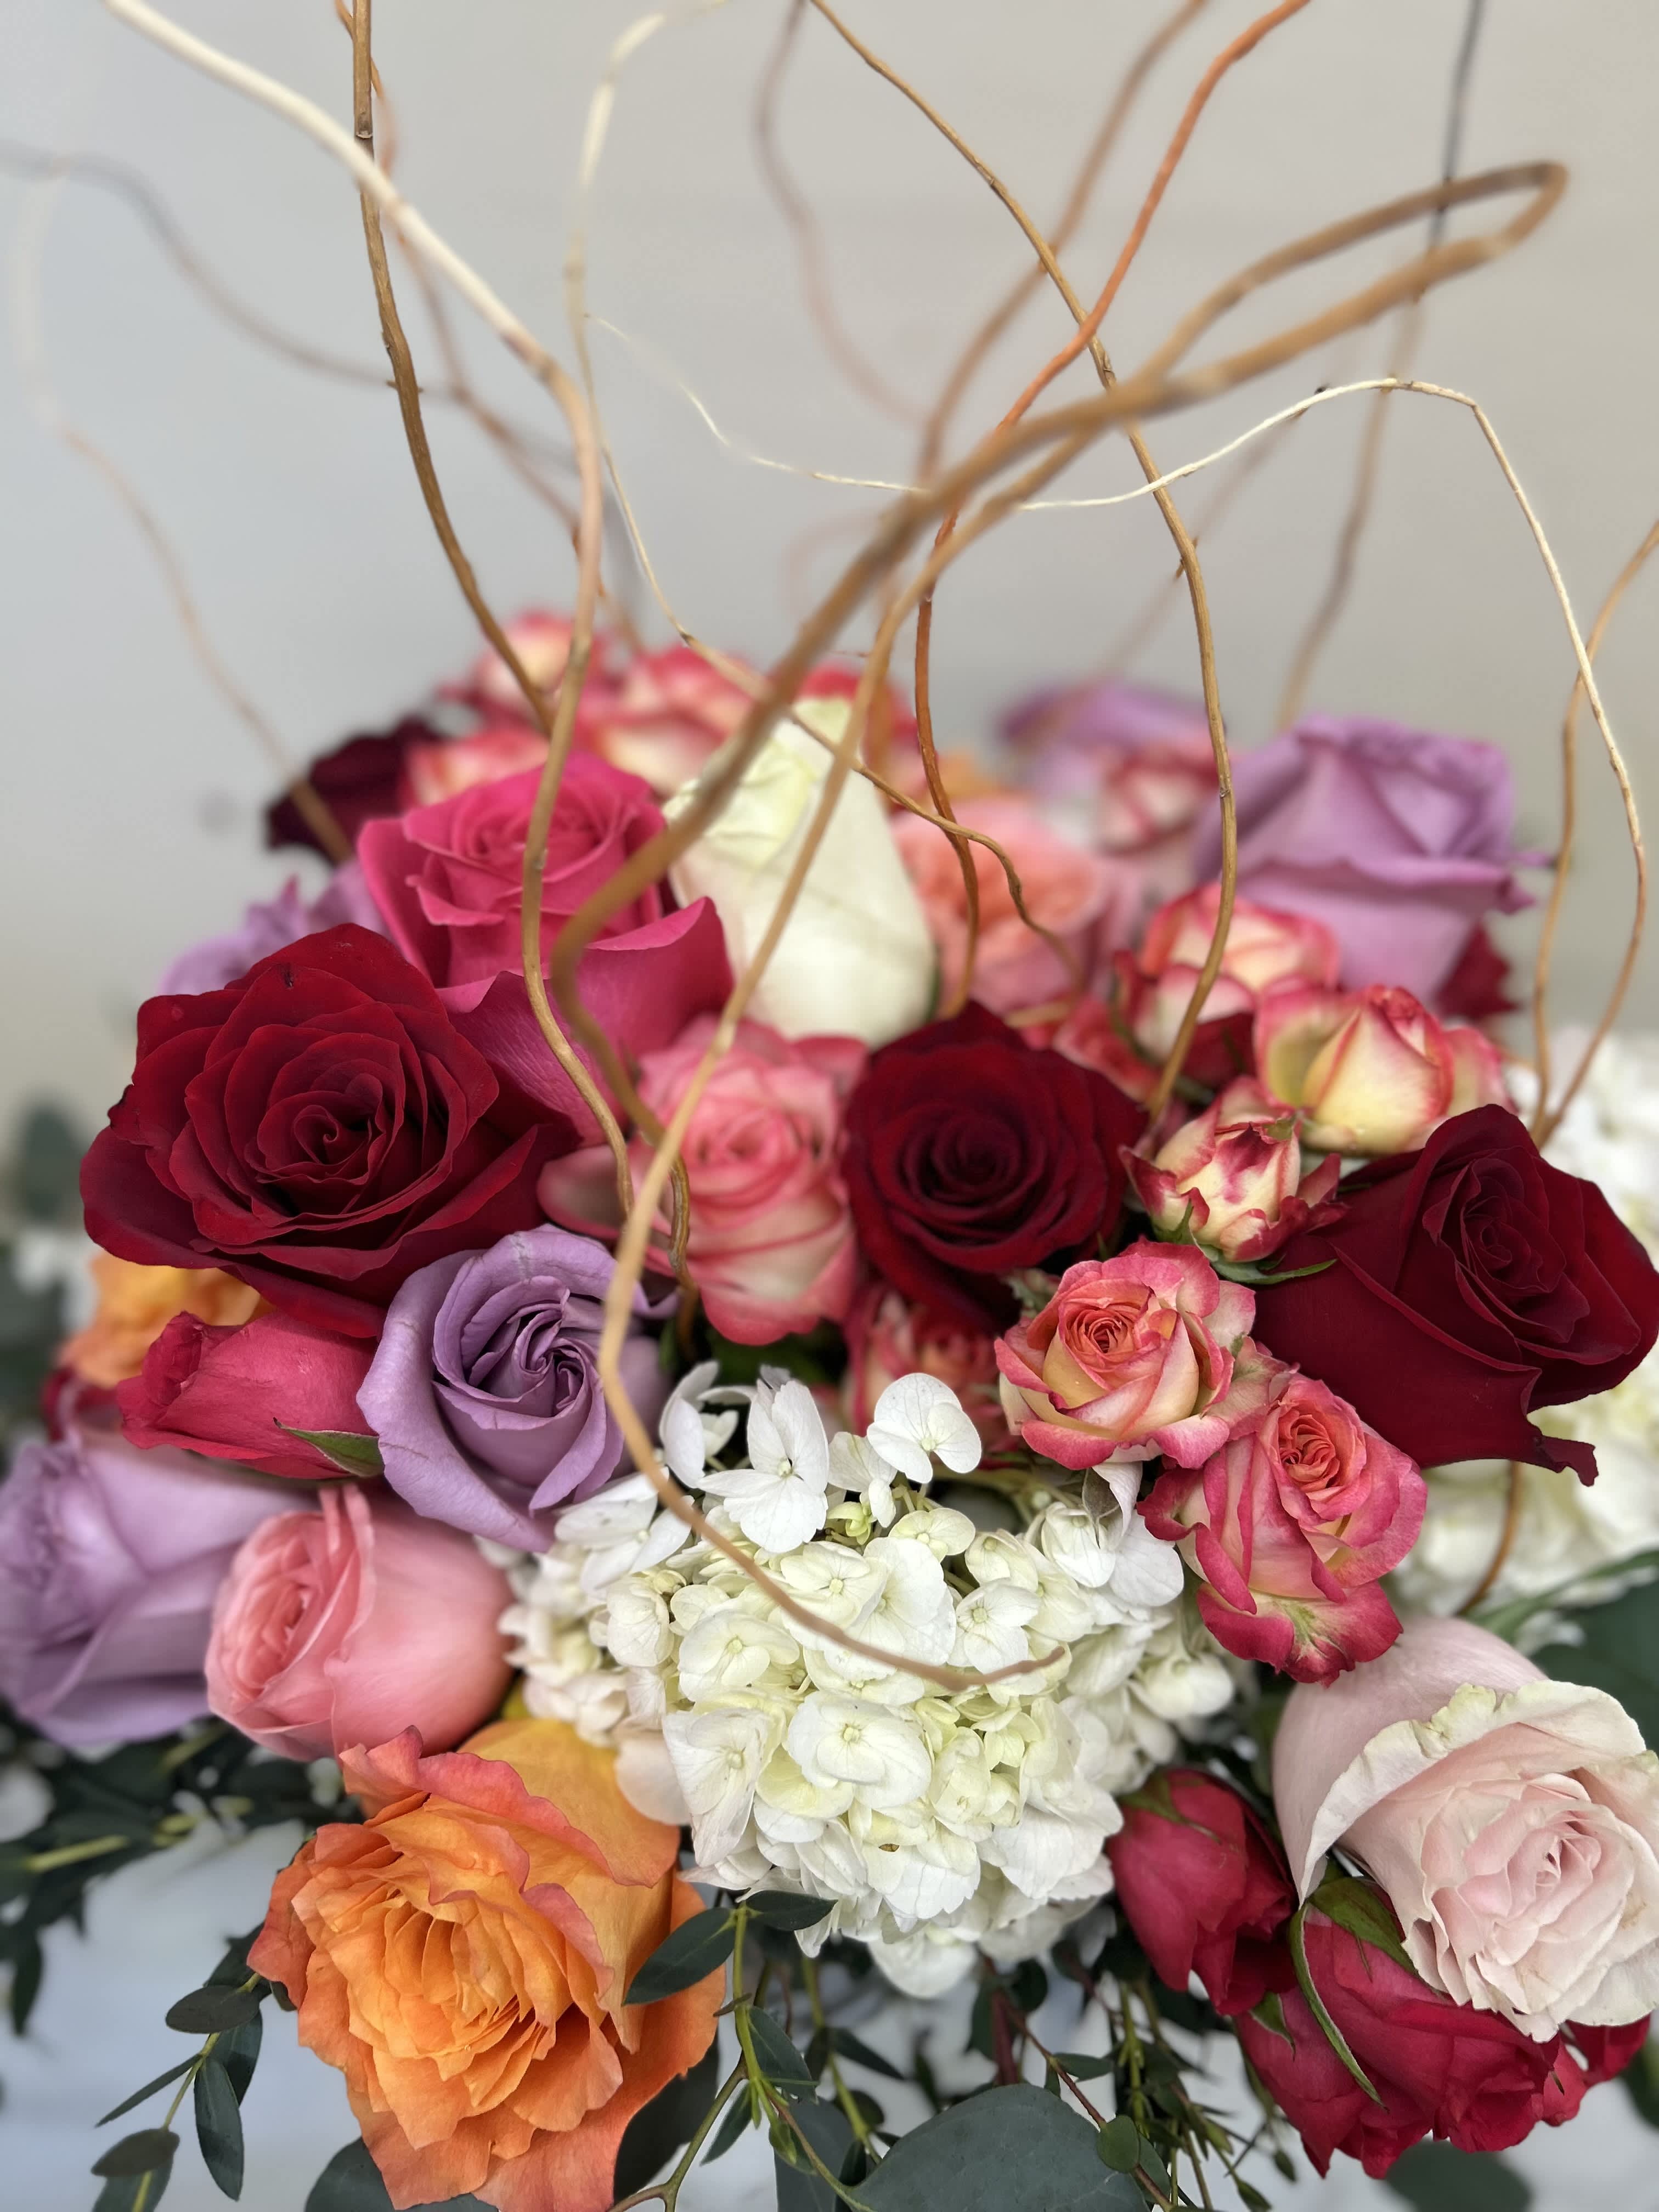 Roses, hydrangeas curly willow, tightly compact in low vase - Mixed color roses red ,purple, pink, orange with hydrangeas and curly willow arranged tightly in a vase